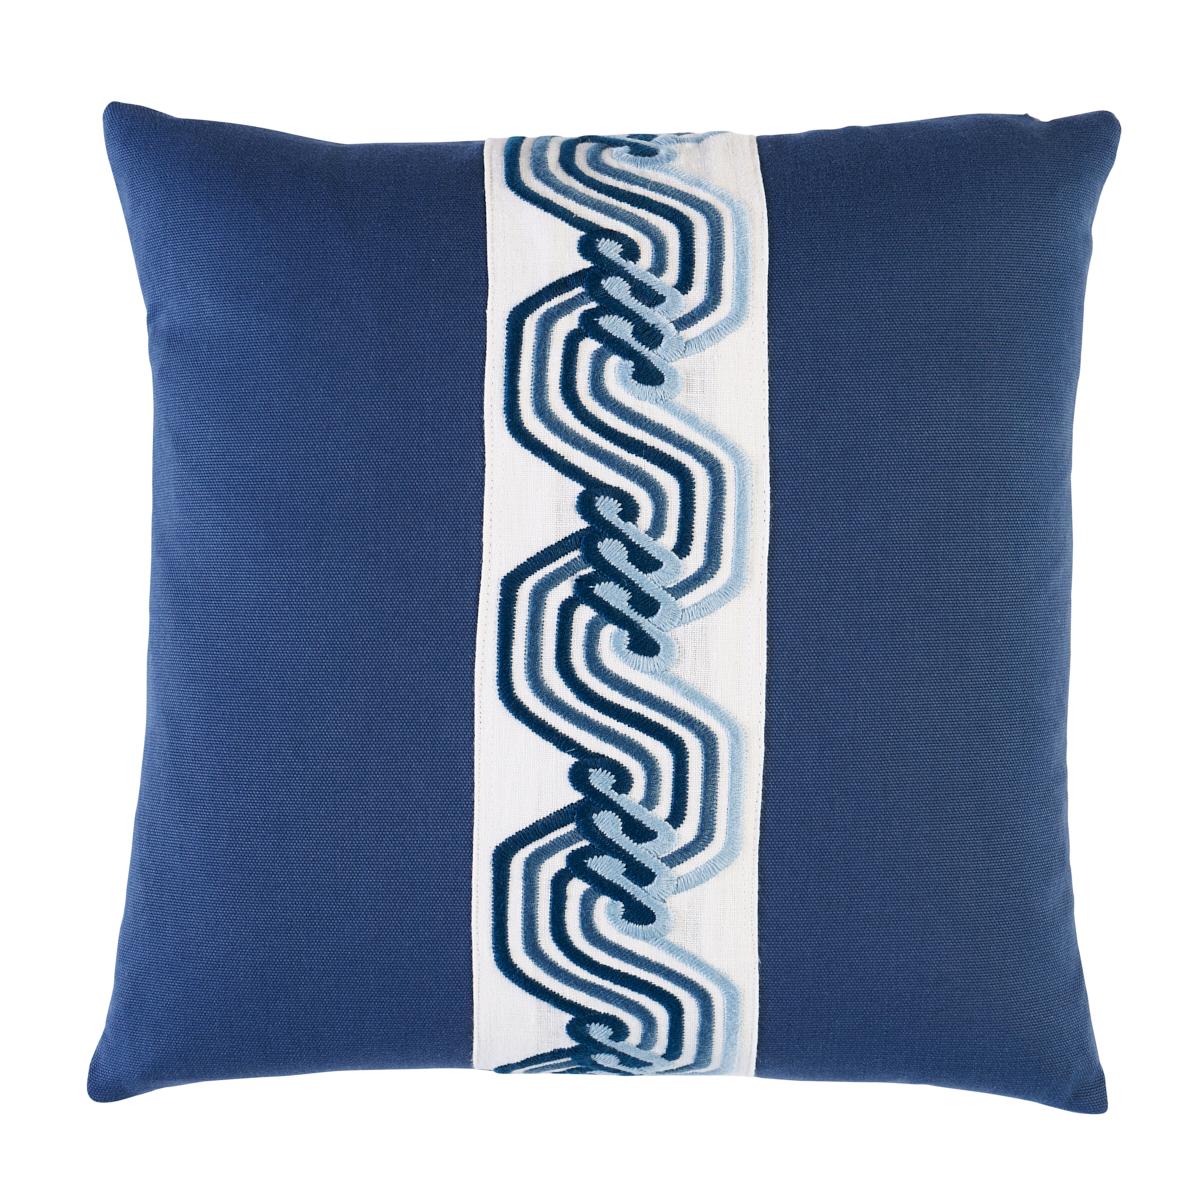 The Twist Embroidered Pillow 16" For Sale